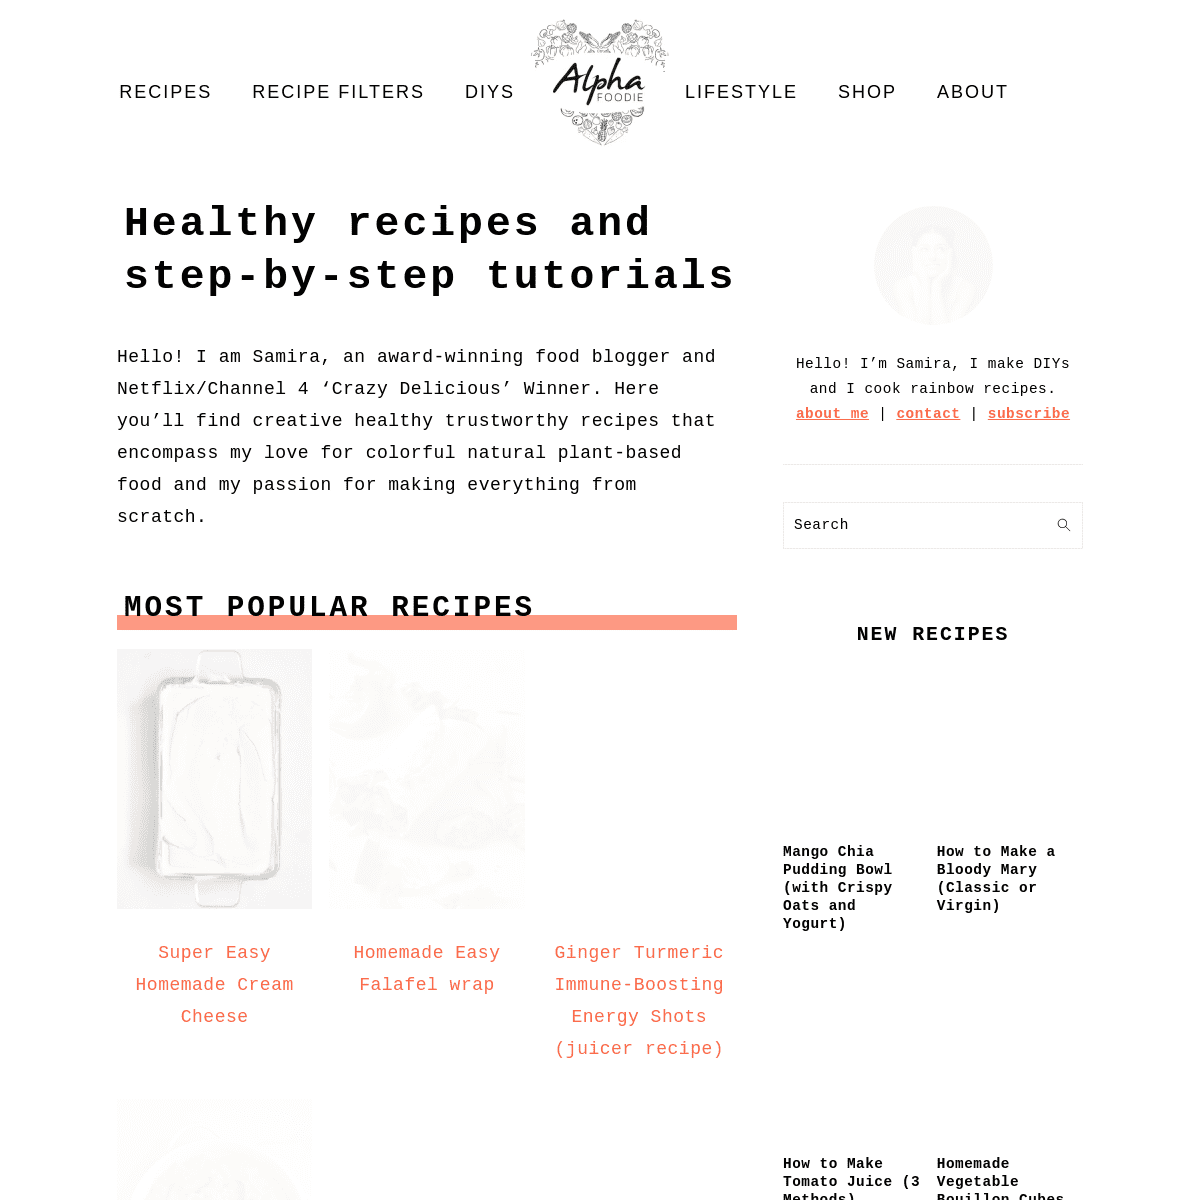 A complete backup of https://alphafoodie.com